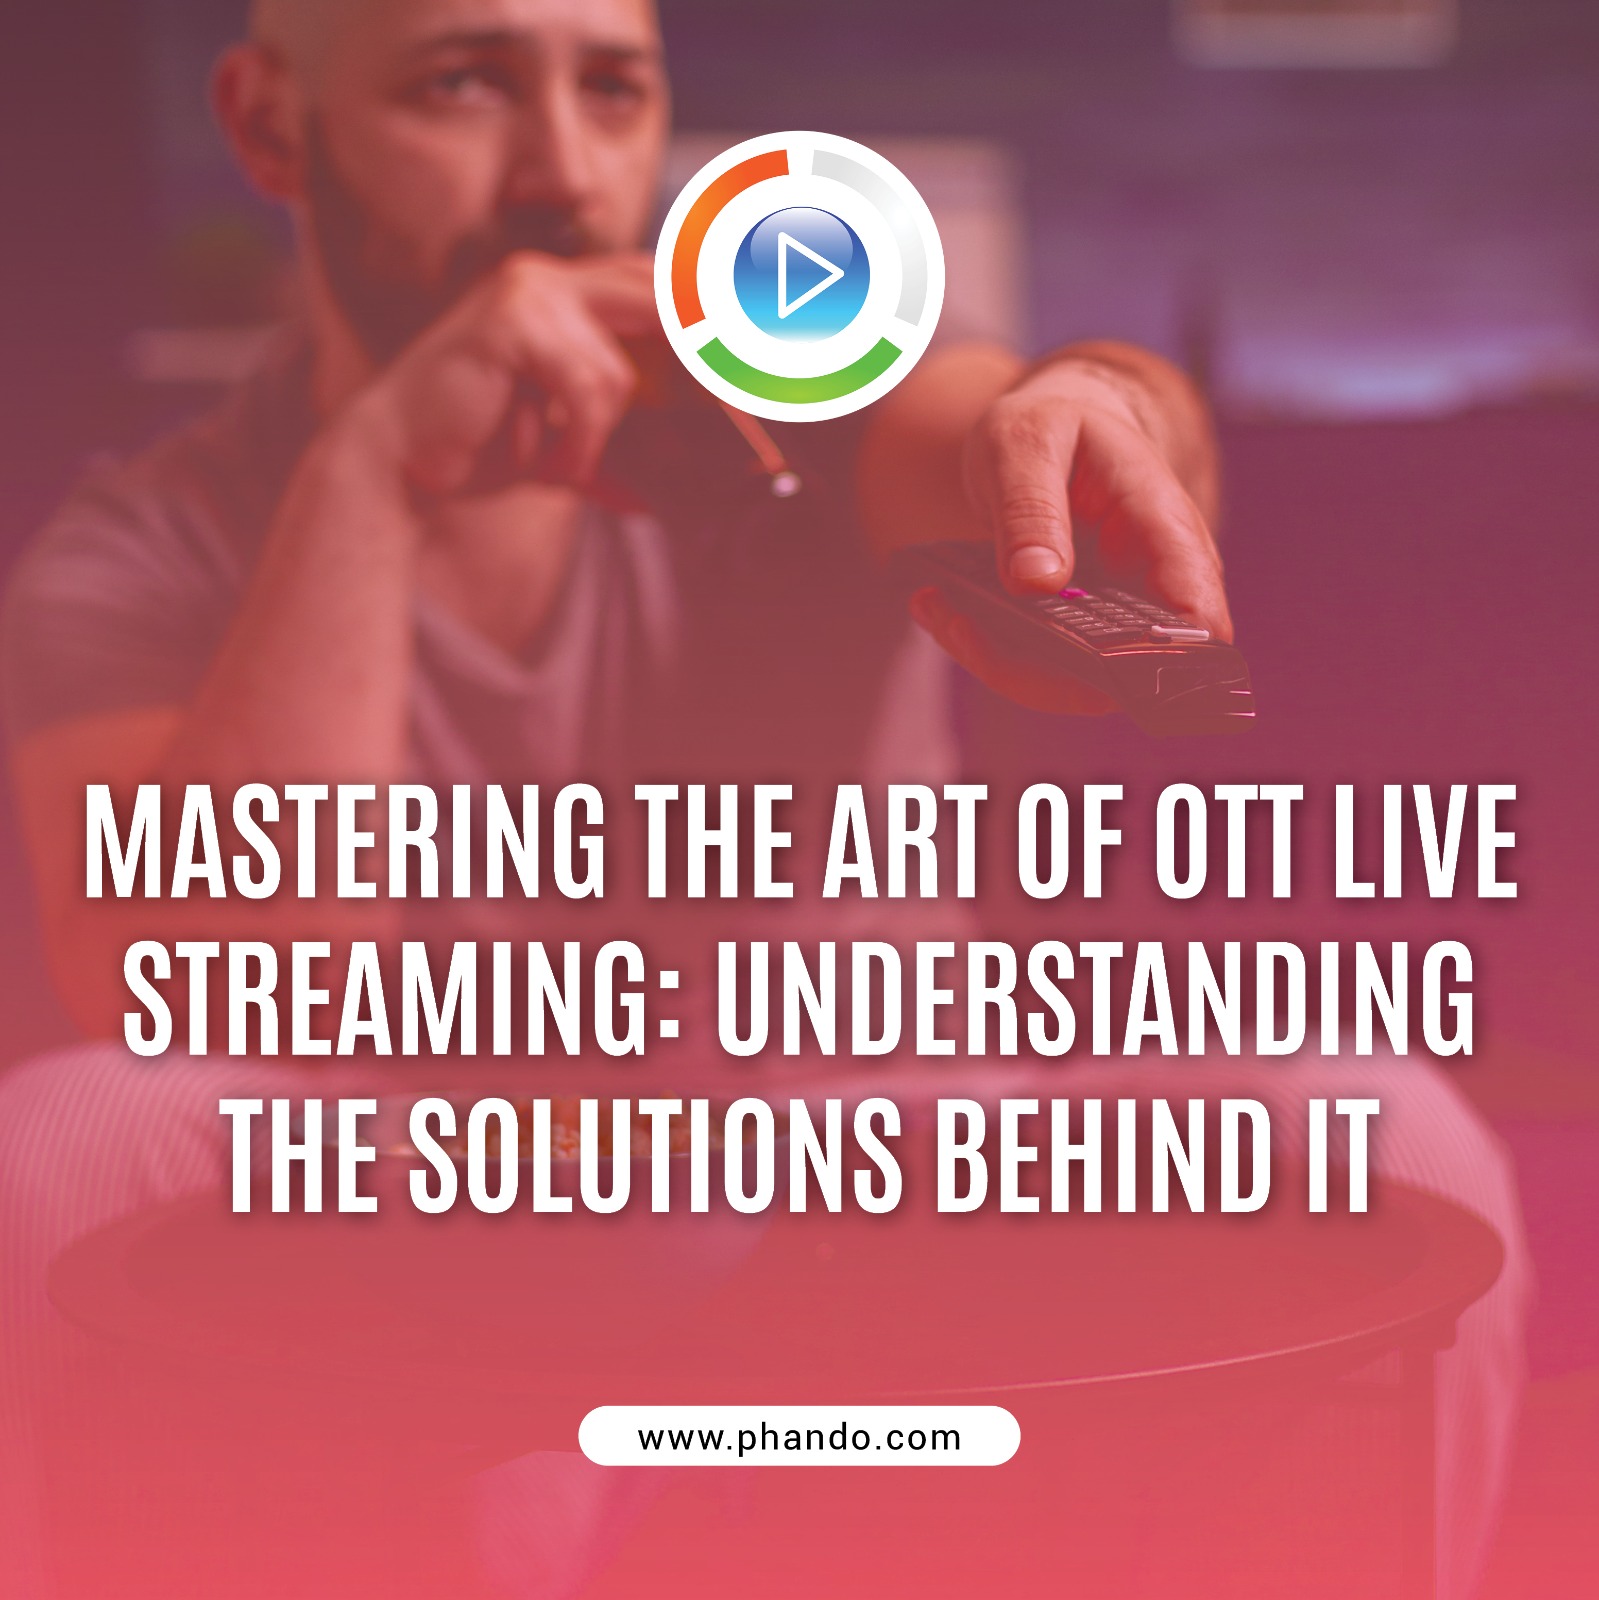 Mastering the Art of OTT Live Streaming Understanding the Solutions Behind It